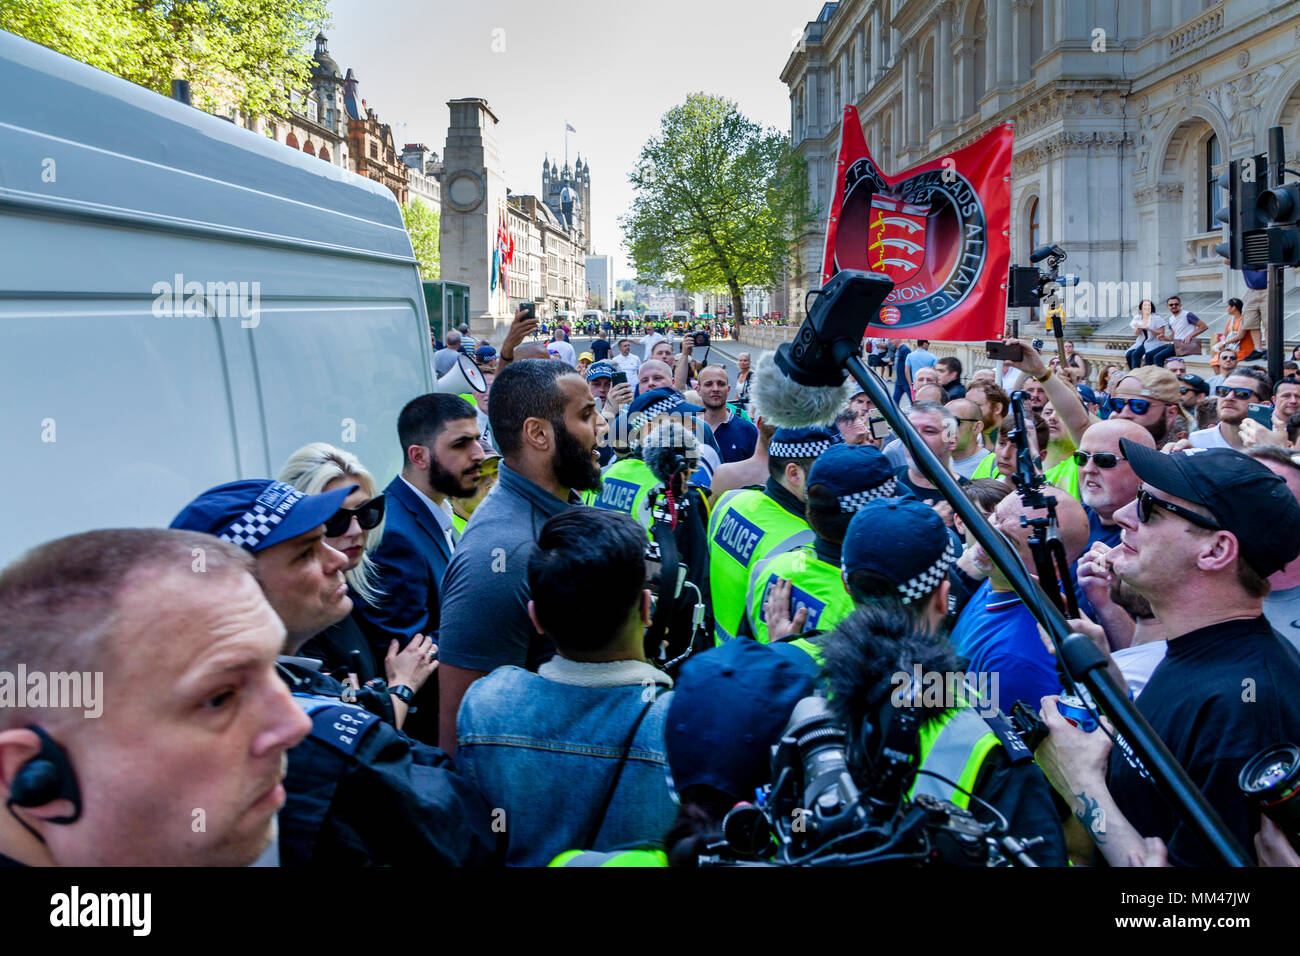 Ali Dawah and Muhammed Hijab both prominent Muslim speakers are confronted by non muslims during a freedom of speech rally, London, UK Stock Photo